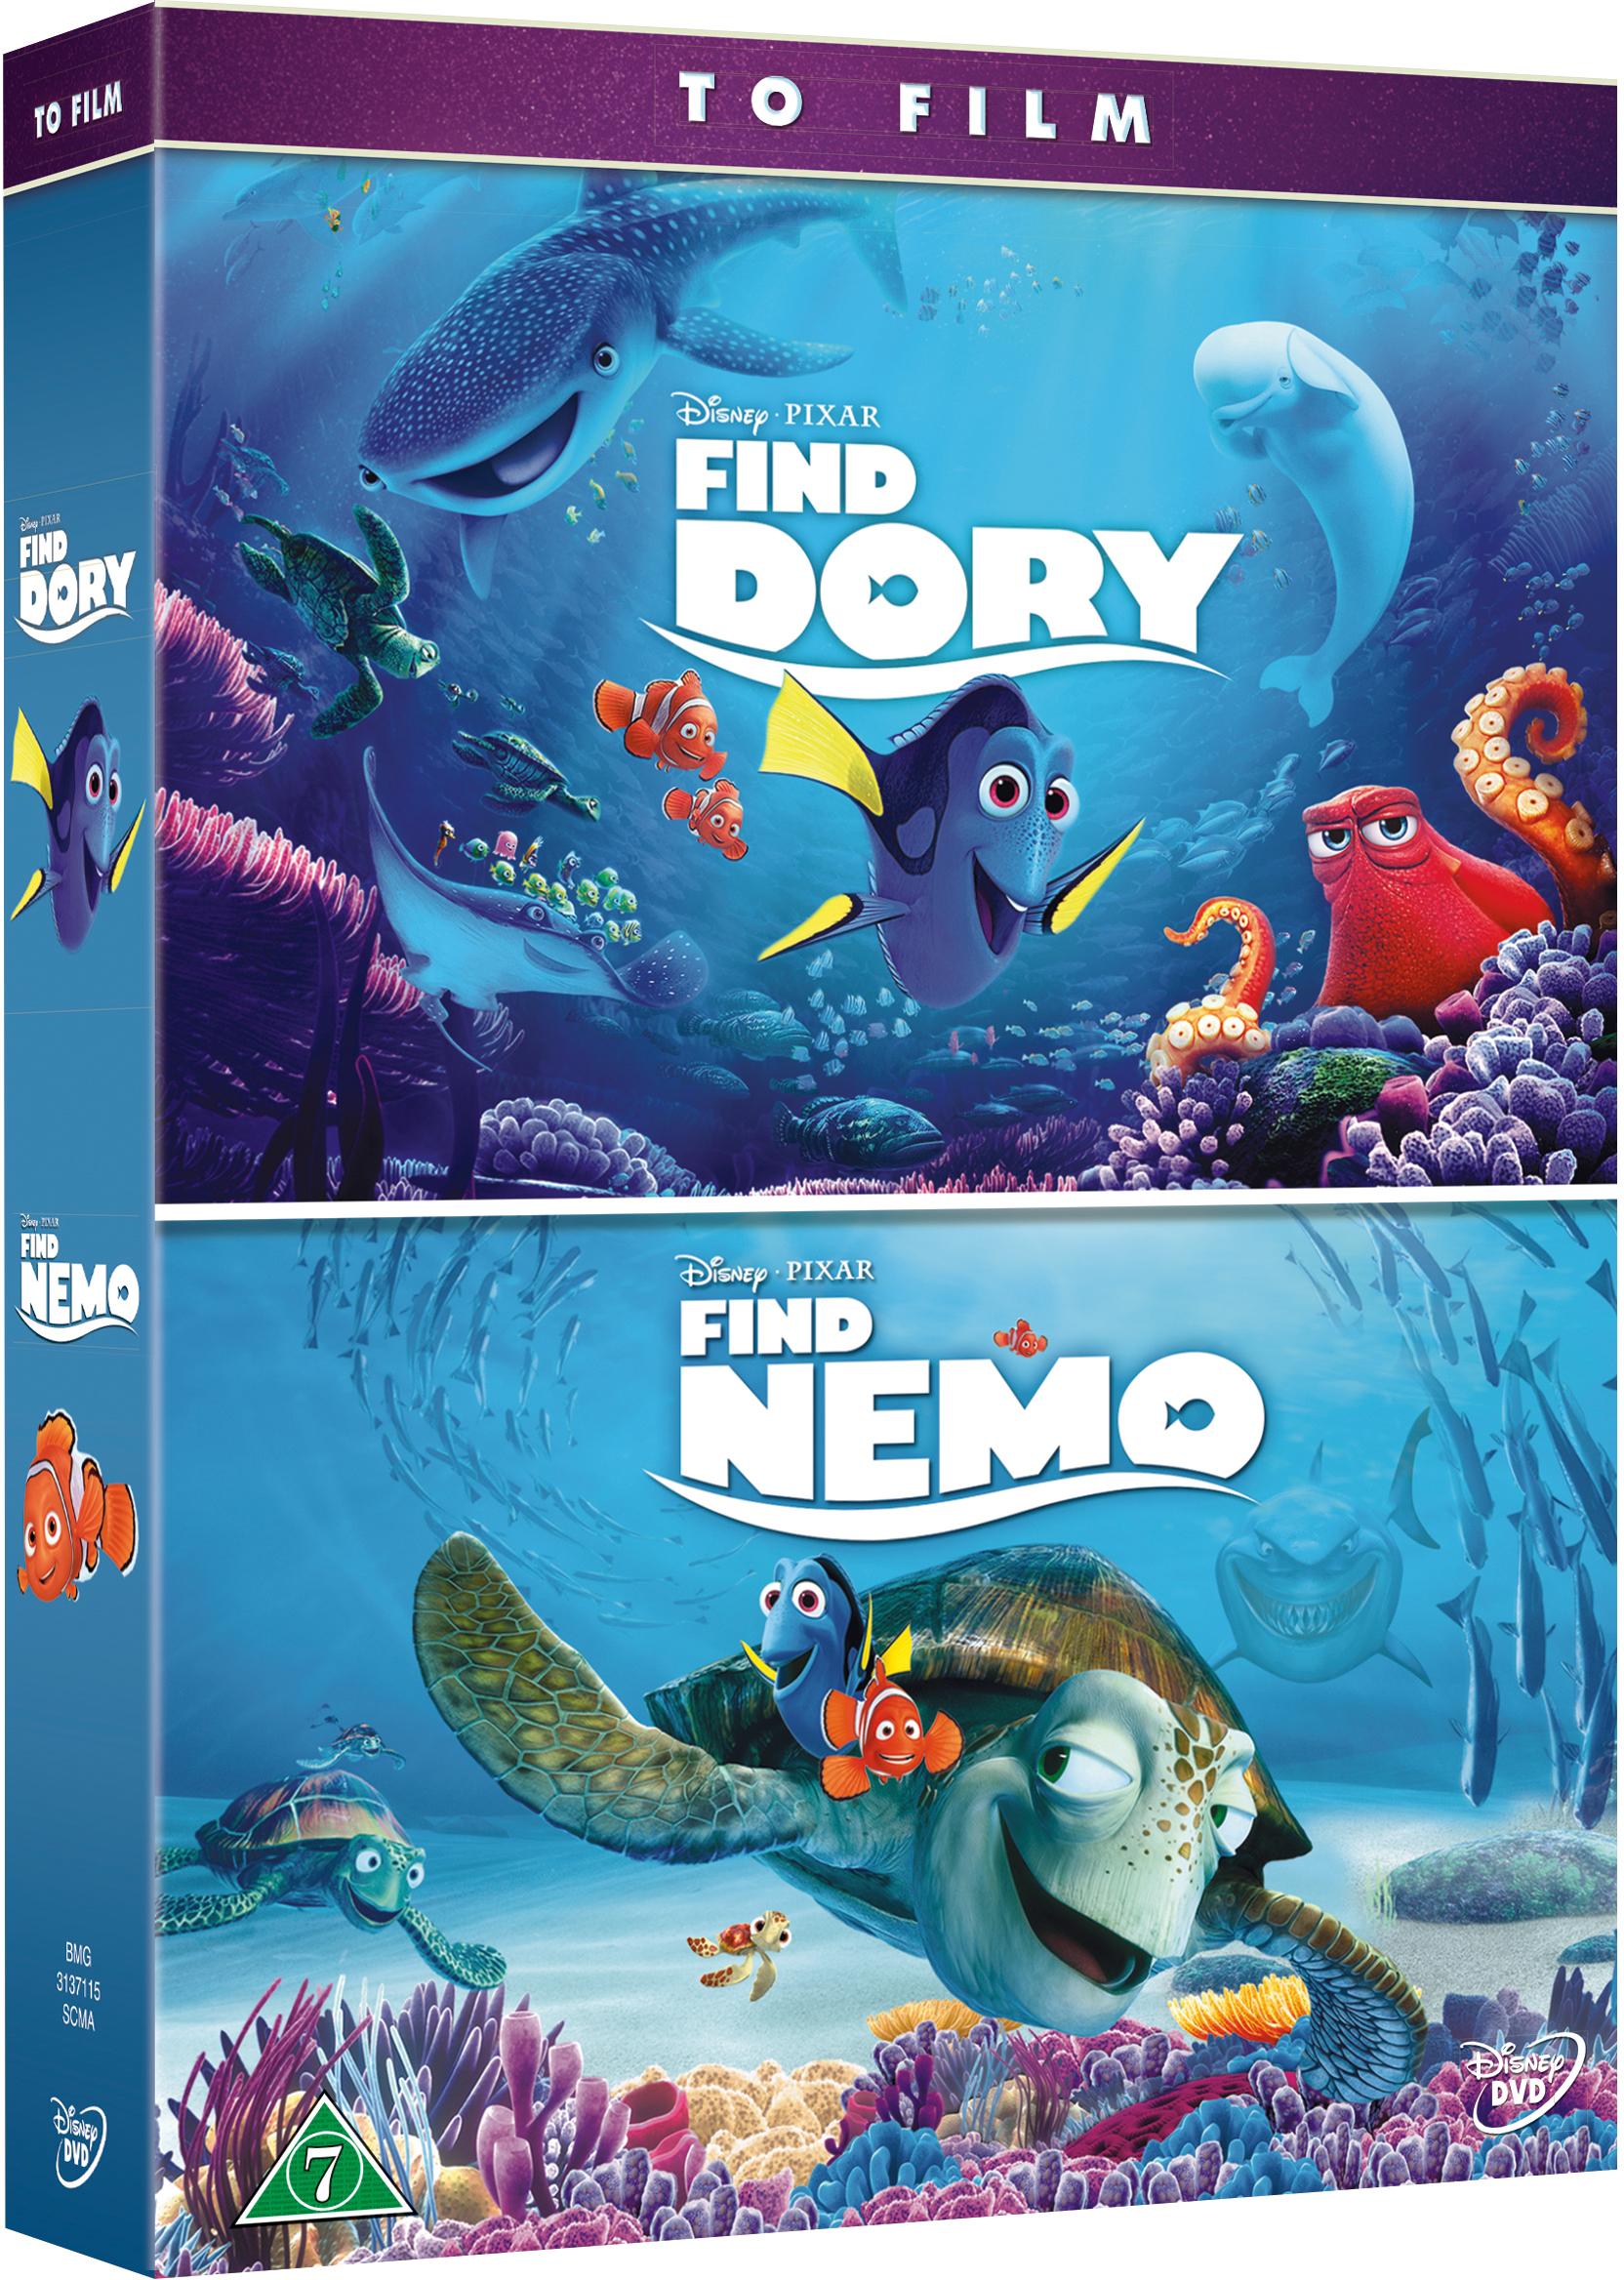 Finding Dory for ipod instal